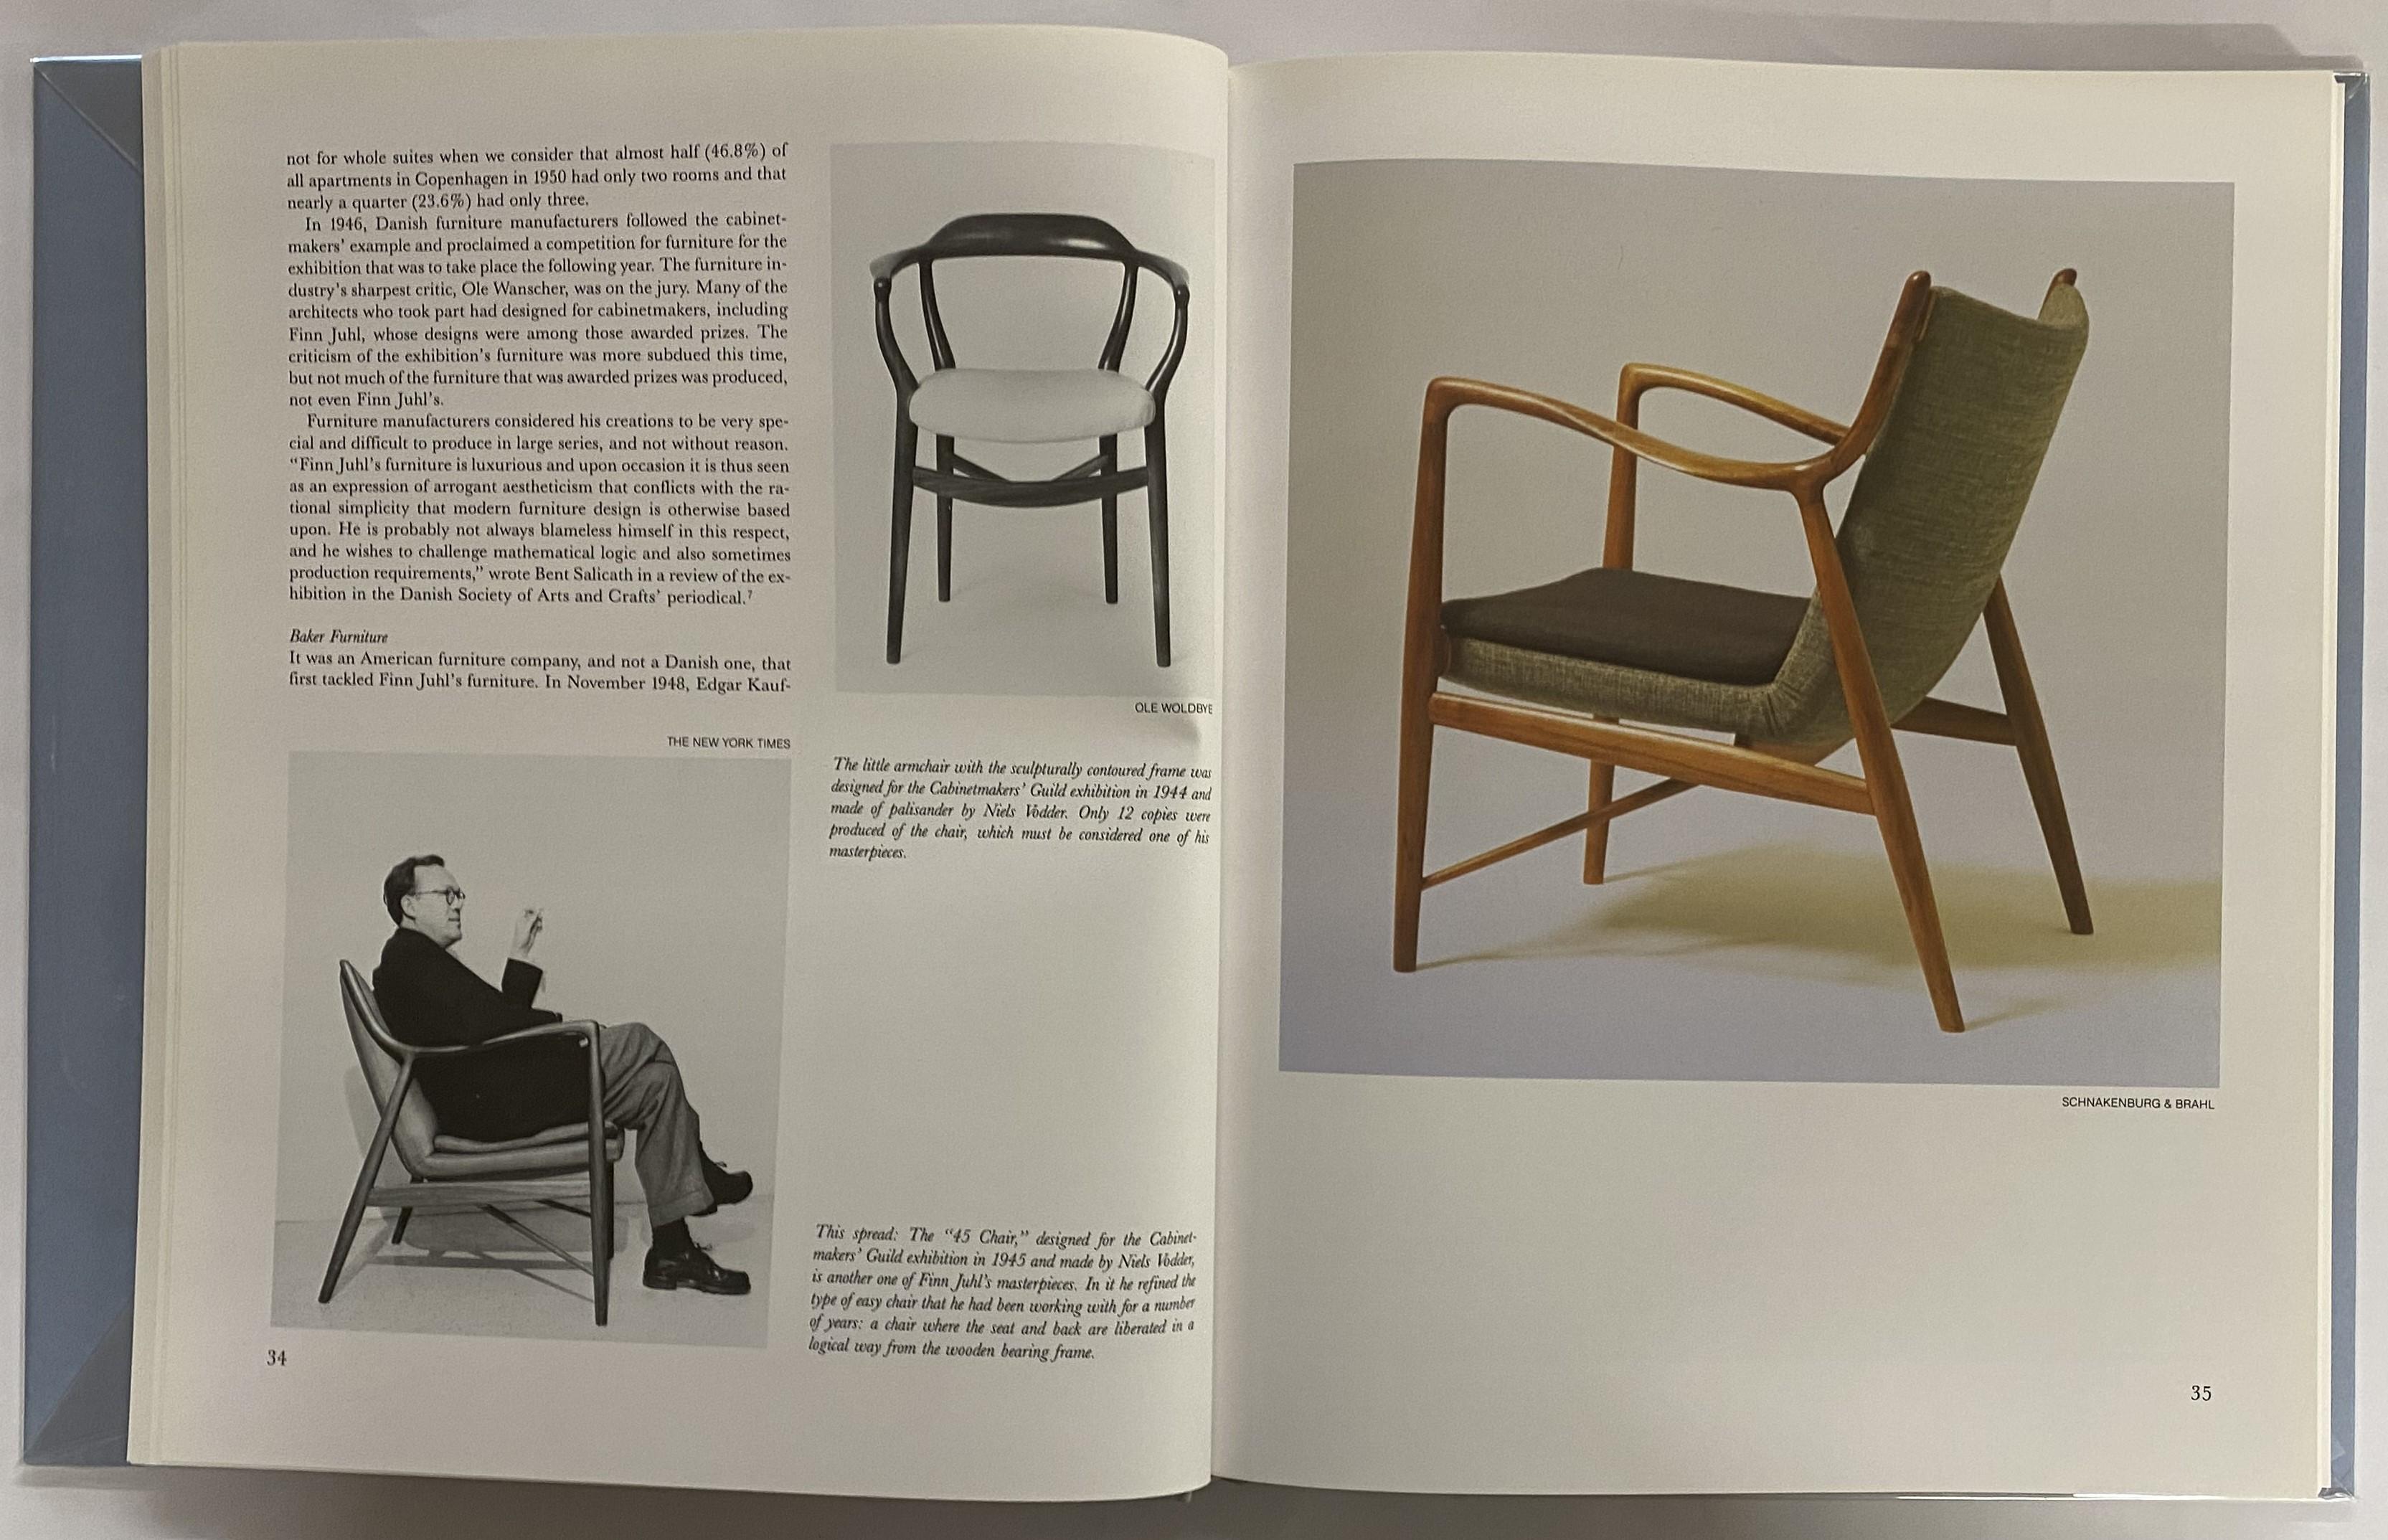 Finn Juhl (1912-1989) was First and foremost famous for his furniture. in the 1940s, he broke with established furniture traditions and designed a number of creations that regenerated Danish furniture design. At the Milan Triennials in the 1950s, he